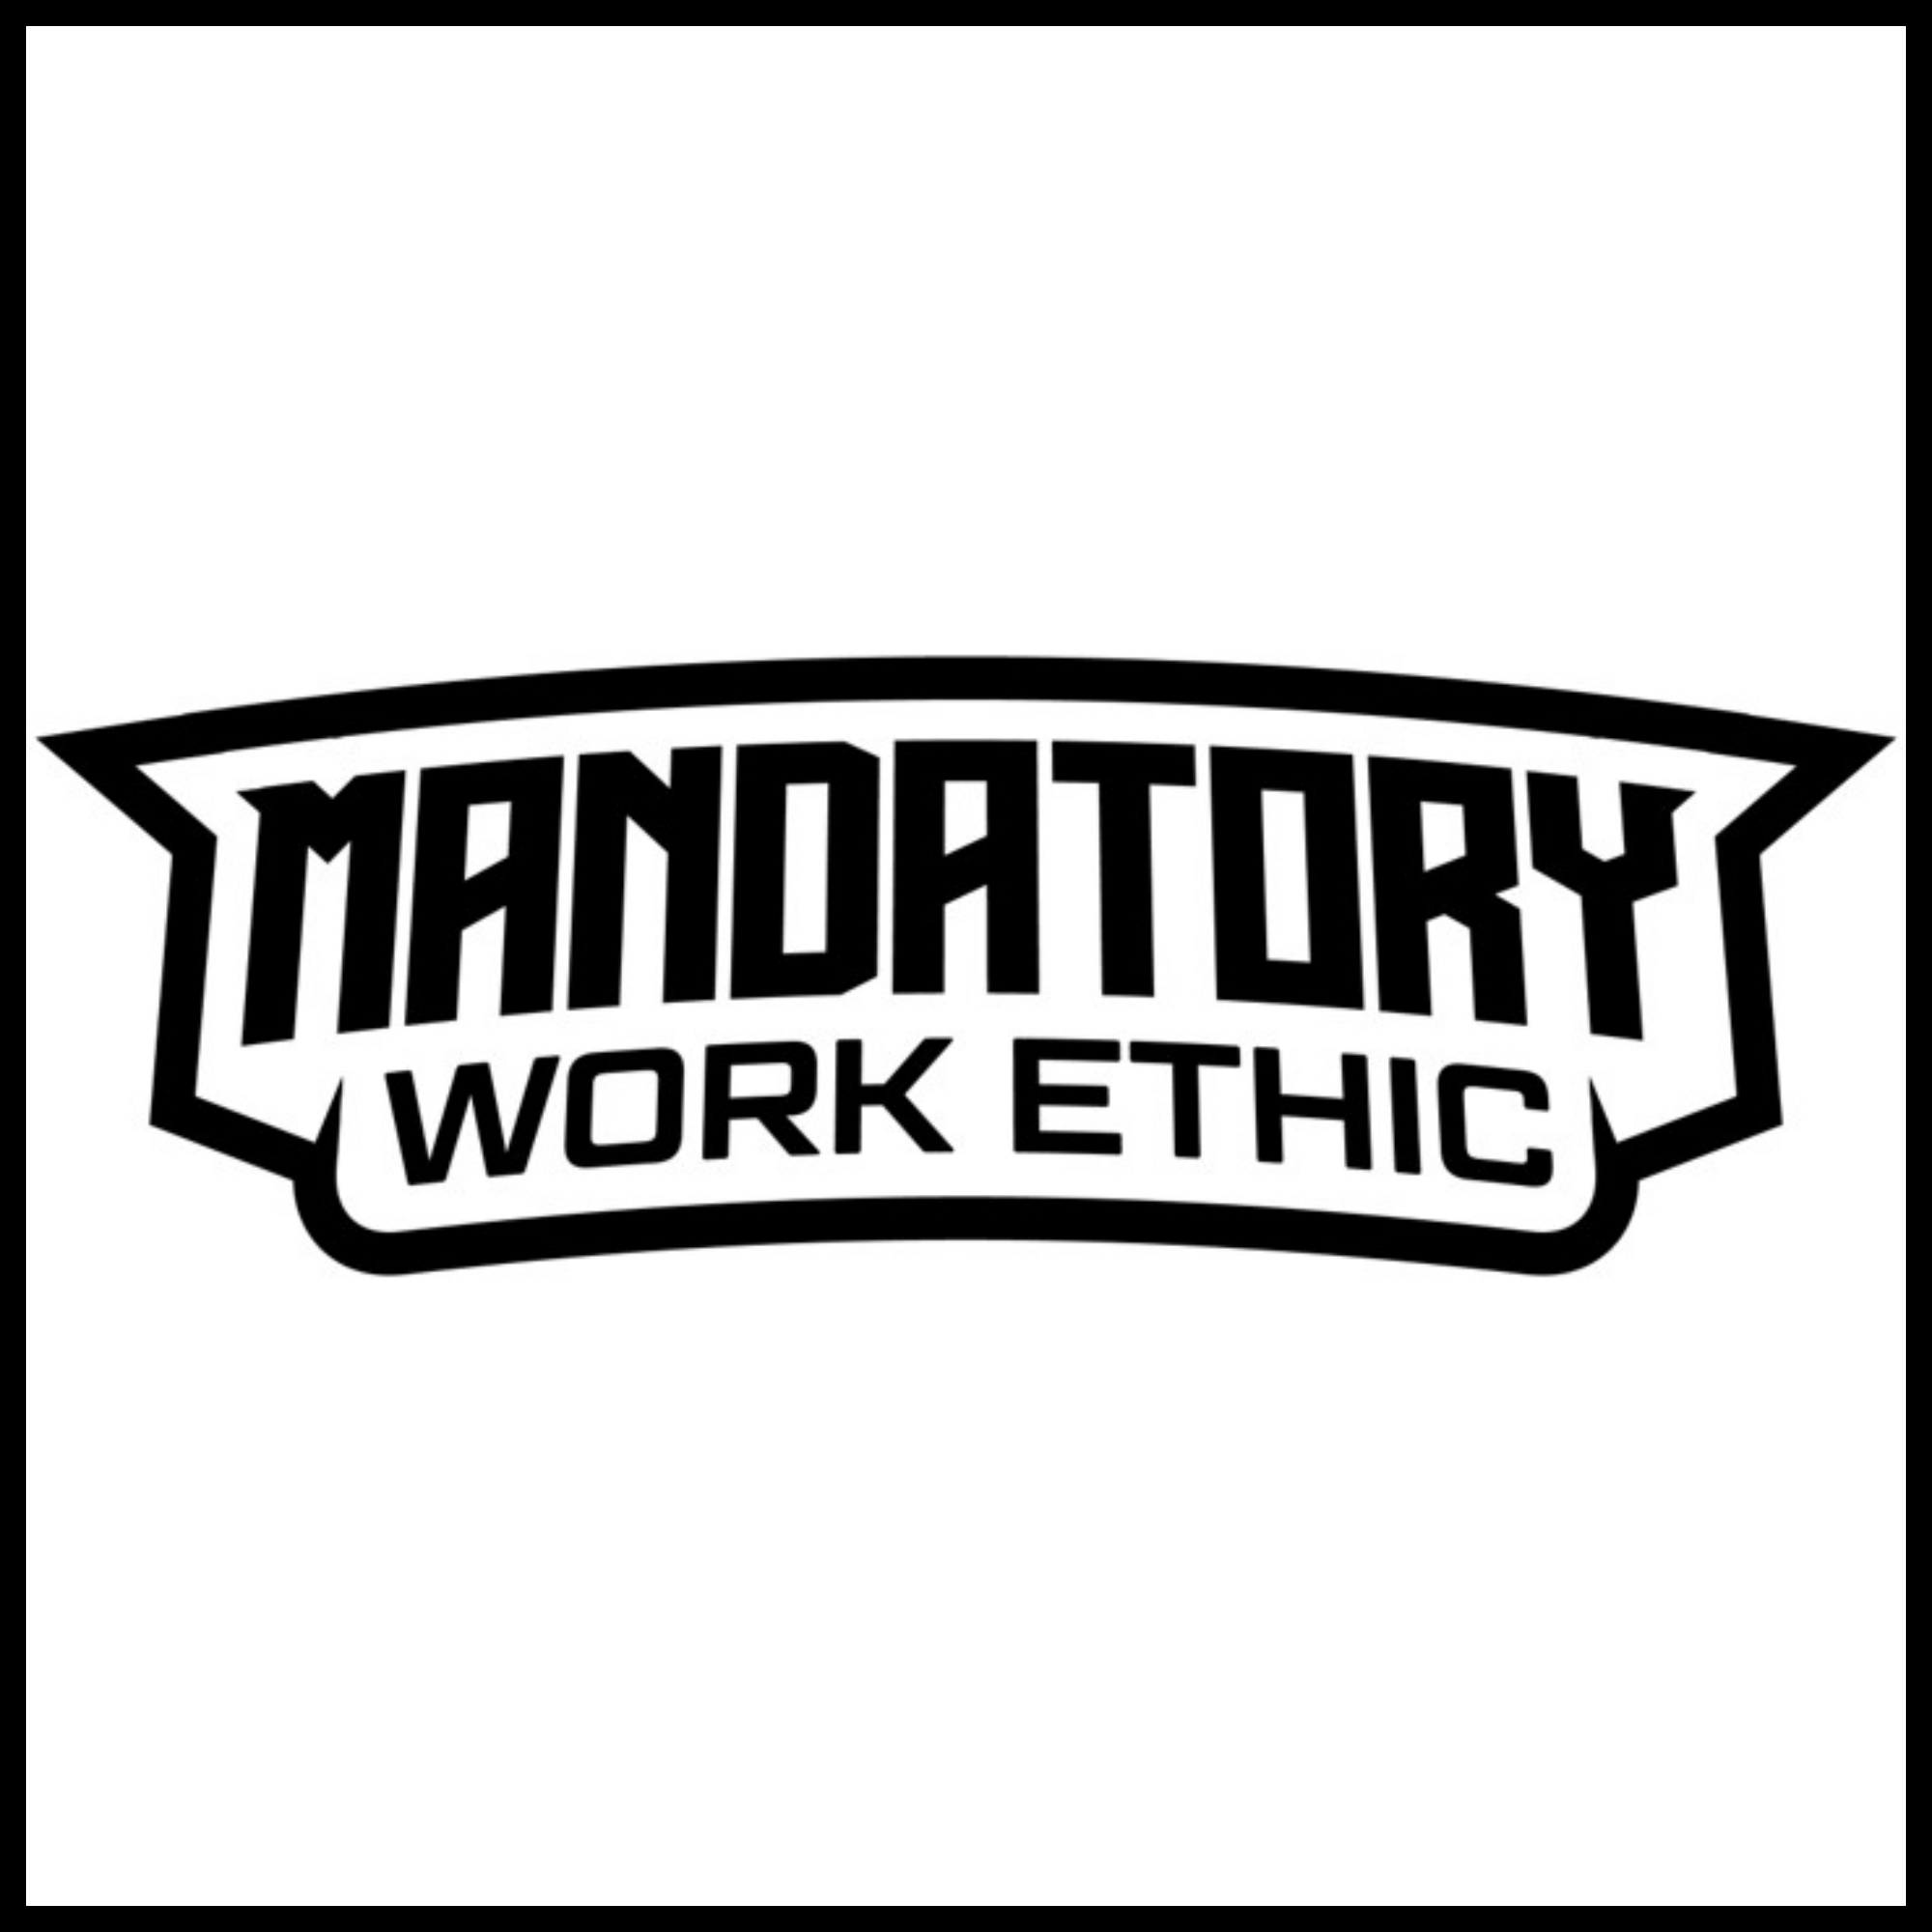 The official logo of Work Ethic